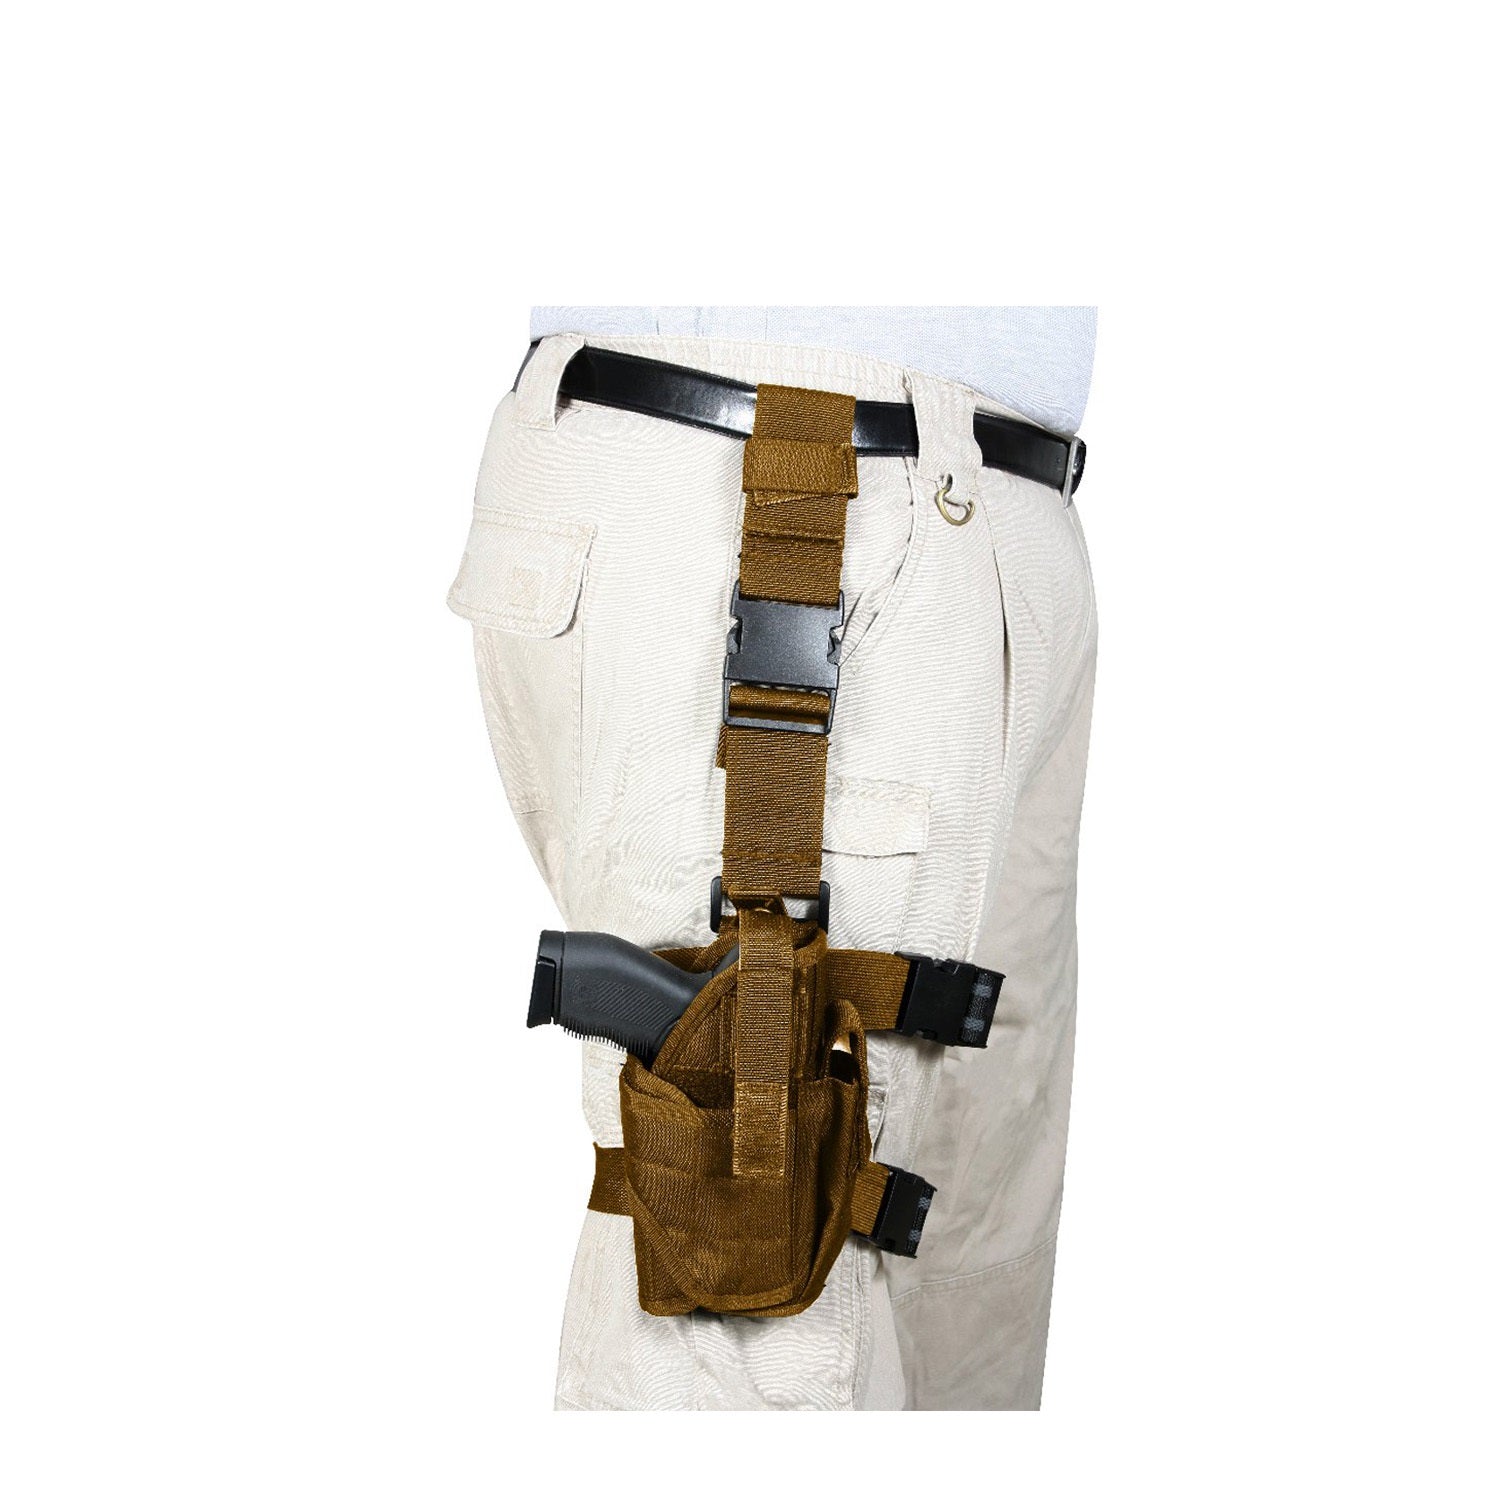 Rothco Deluxe Adjustable Drop Leg Tactical Holster Coyote Brown